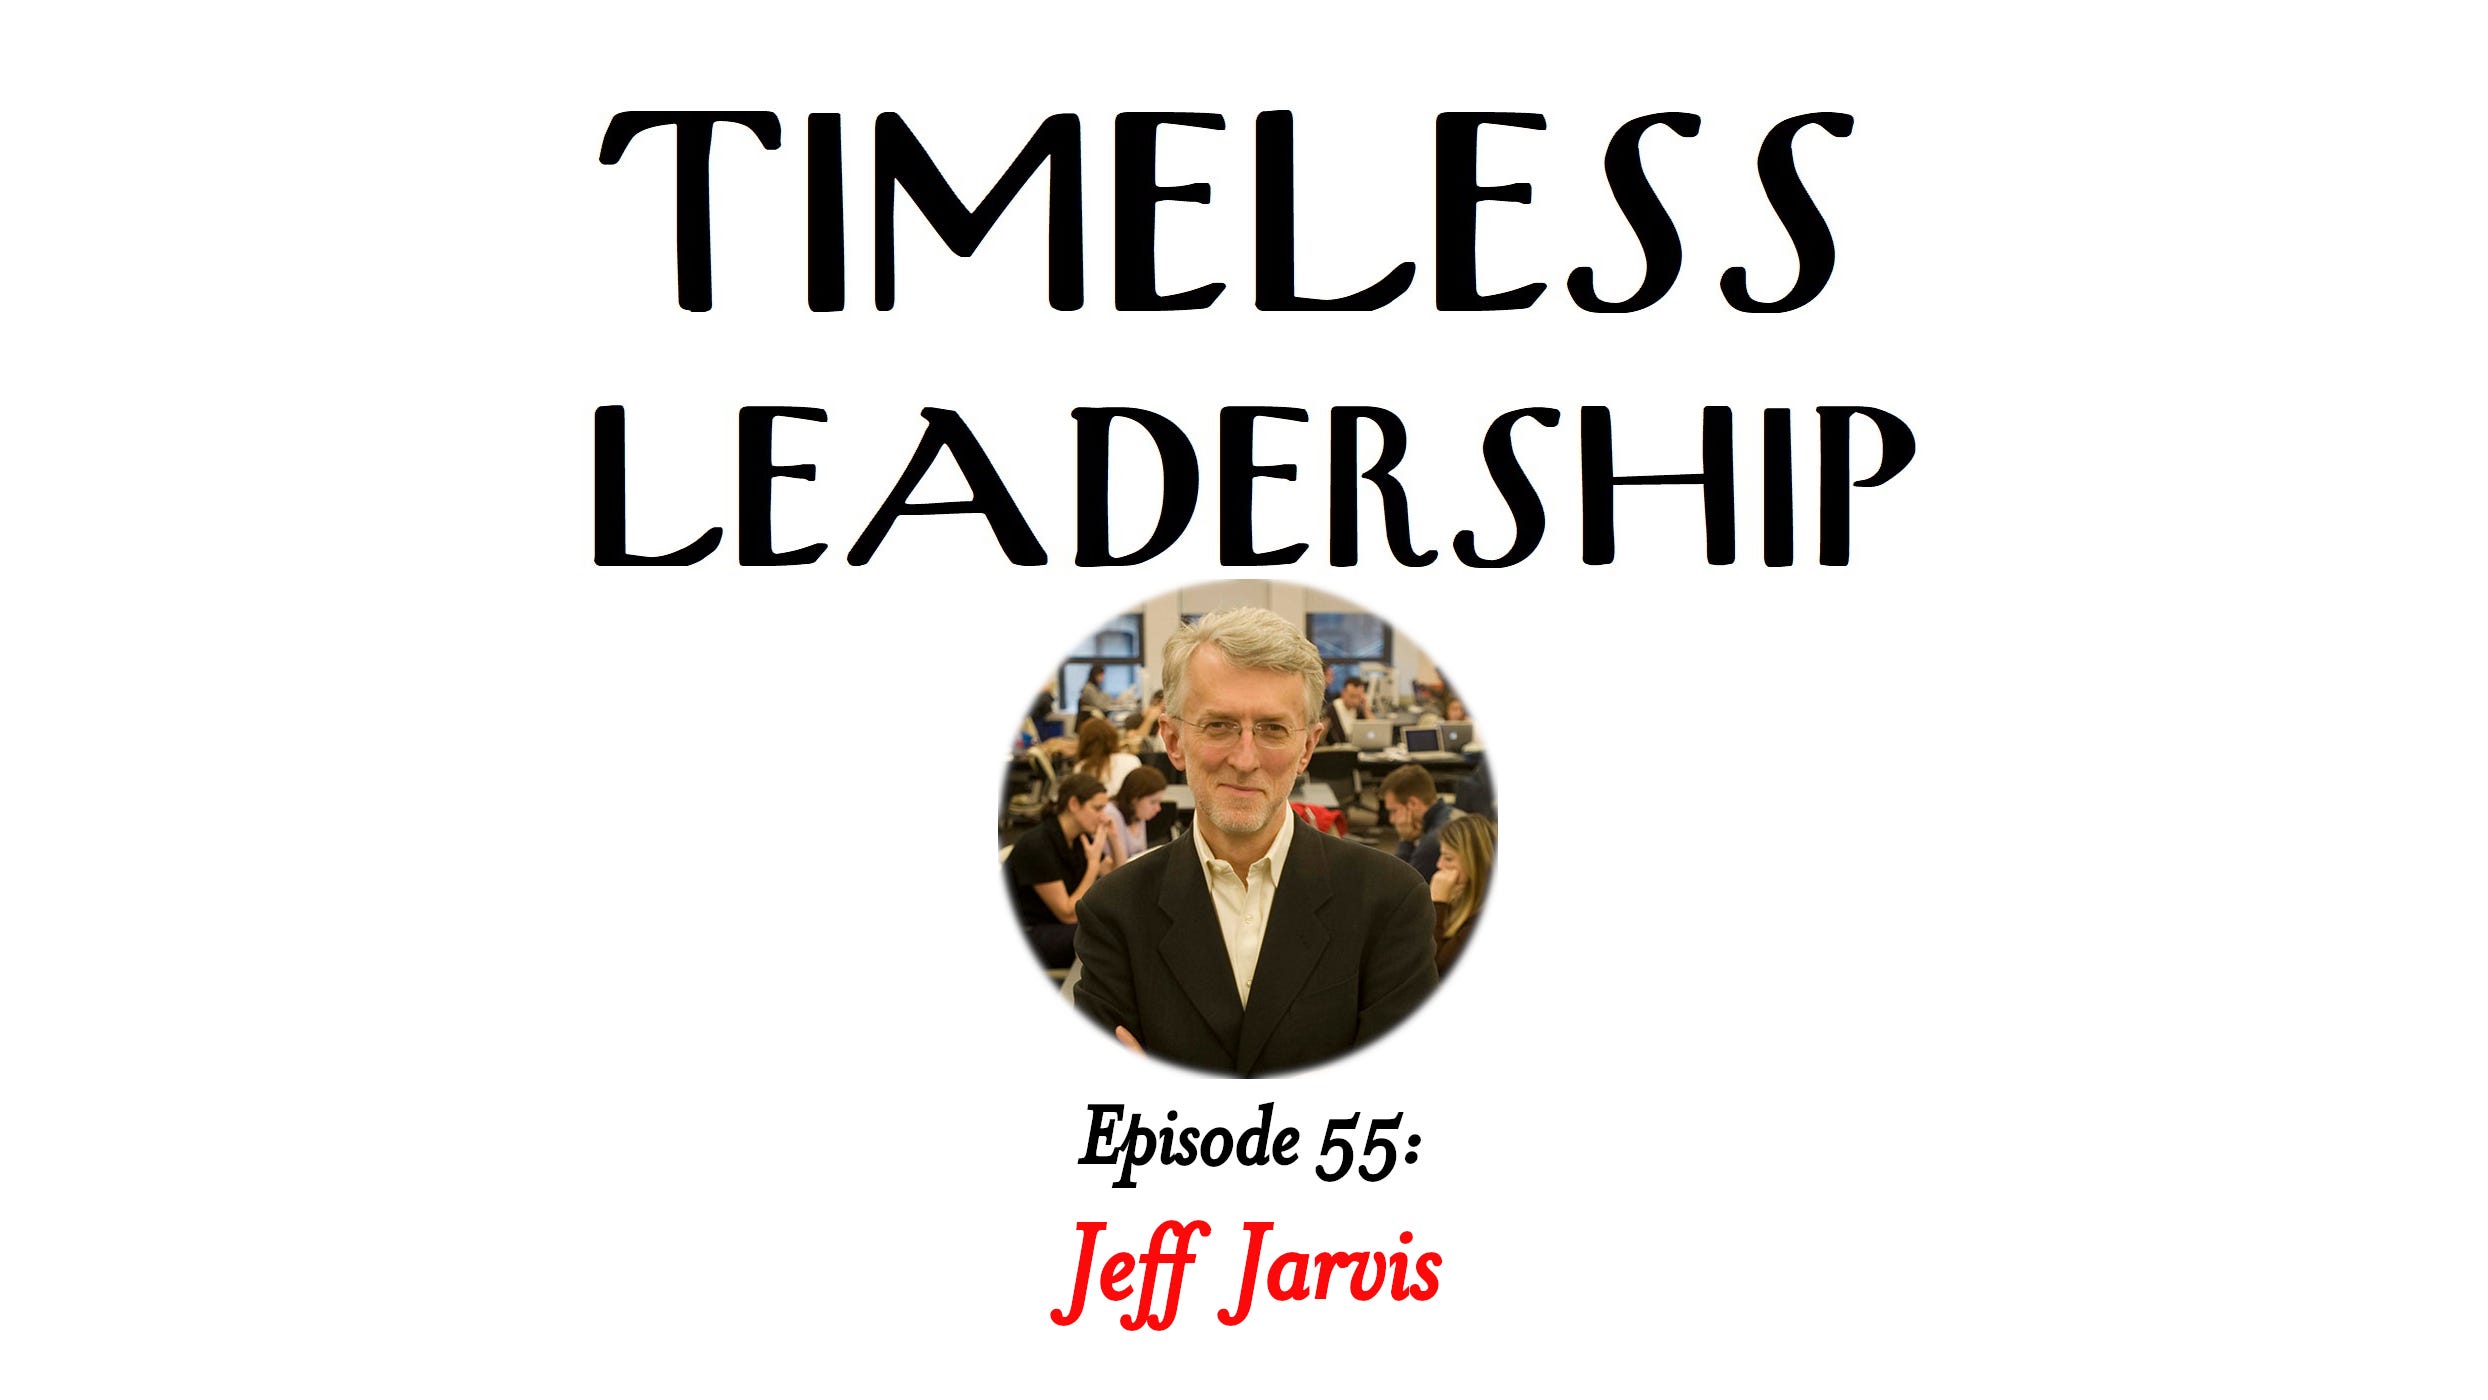 Episode 55: The Gutenberg Parenthesis with Jeff Jarvis